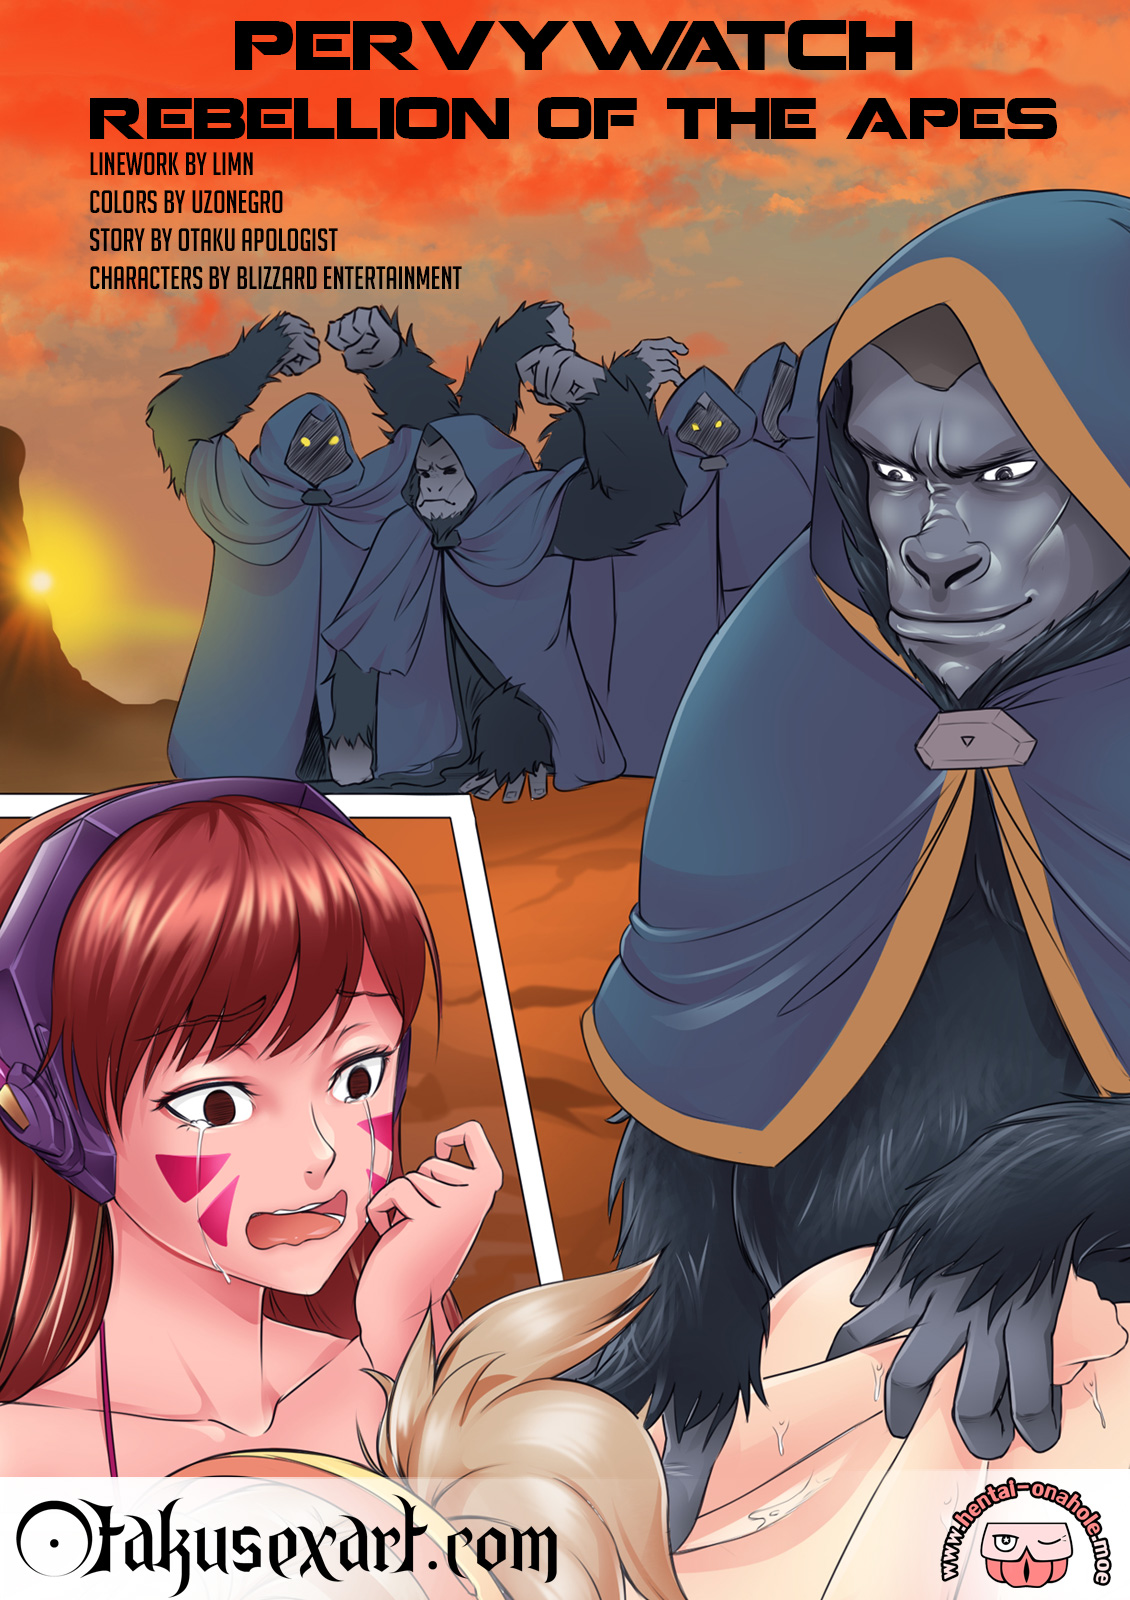 pervywatch rebellion of the apes overwatch hentai comic with dva mercy winston group sex orgy